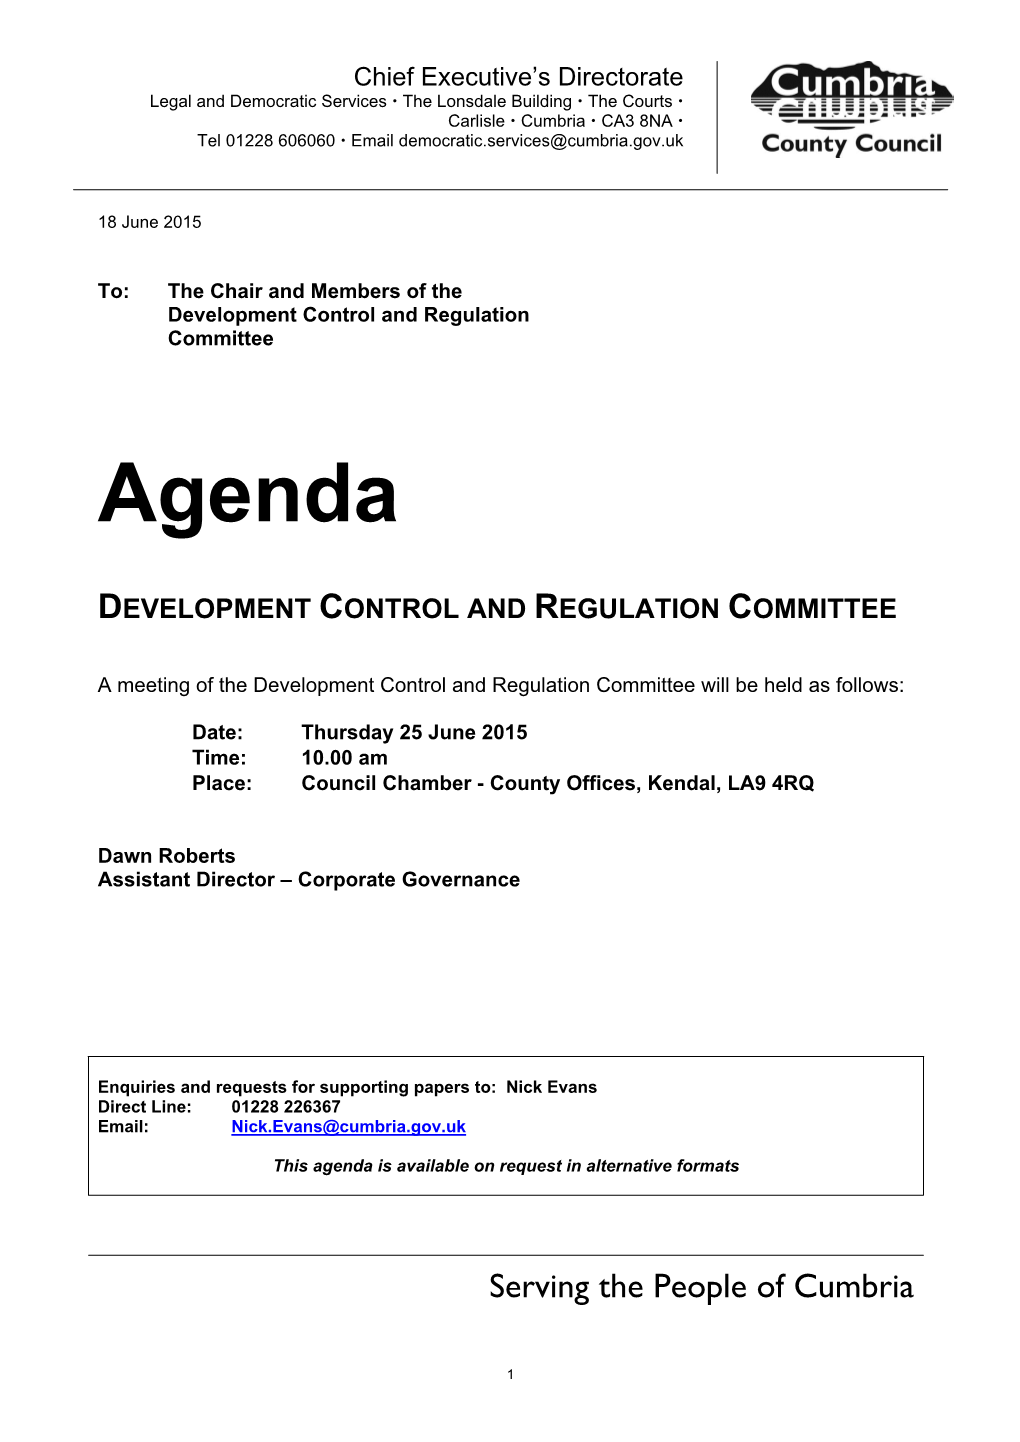 (Public Pack)Agenda Document for Development Control And